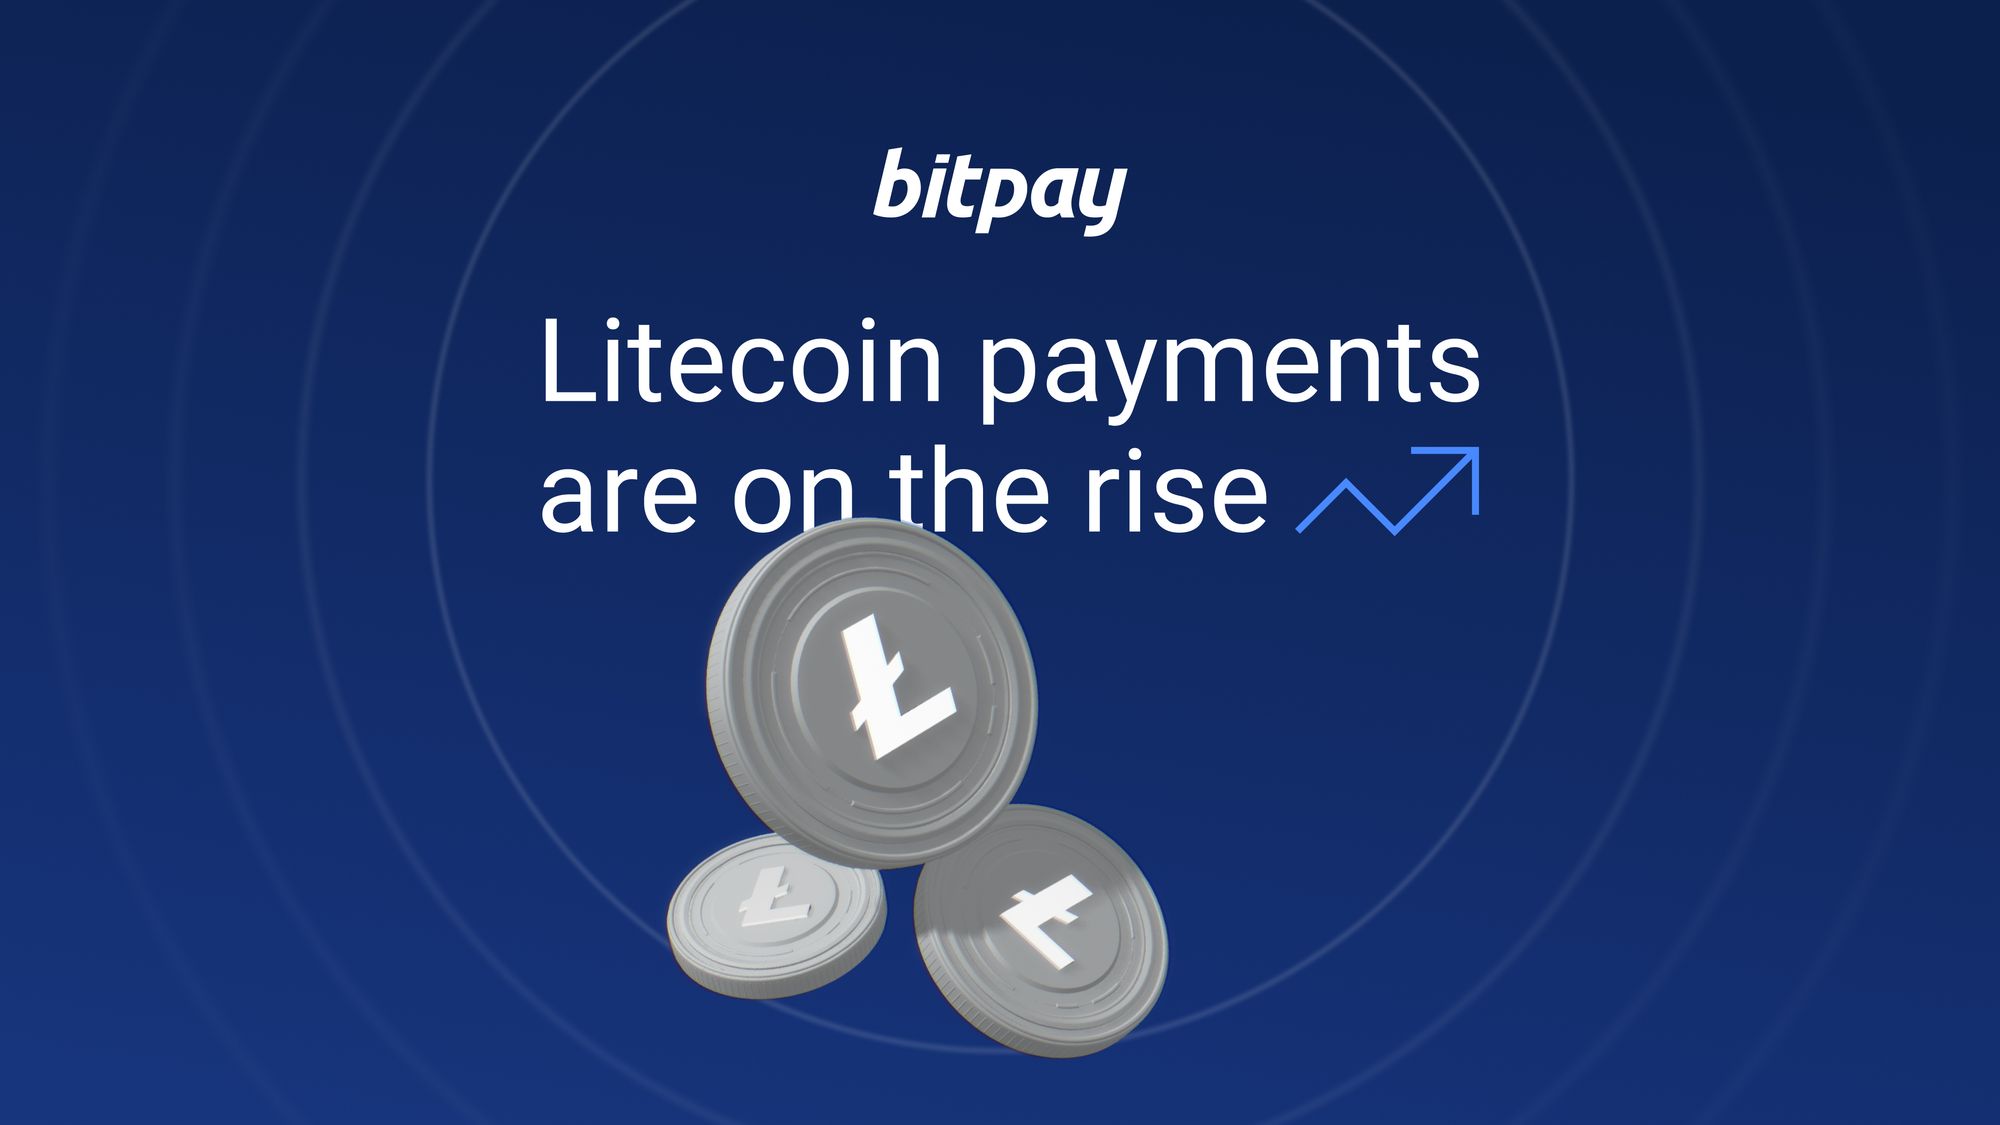 Litecoin on the Rise as Top Crypto Payment Method